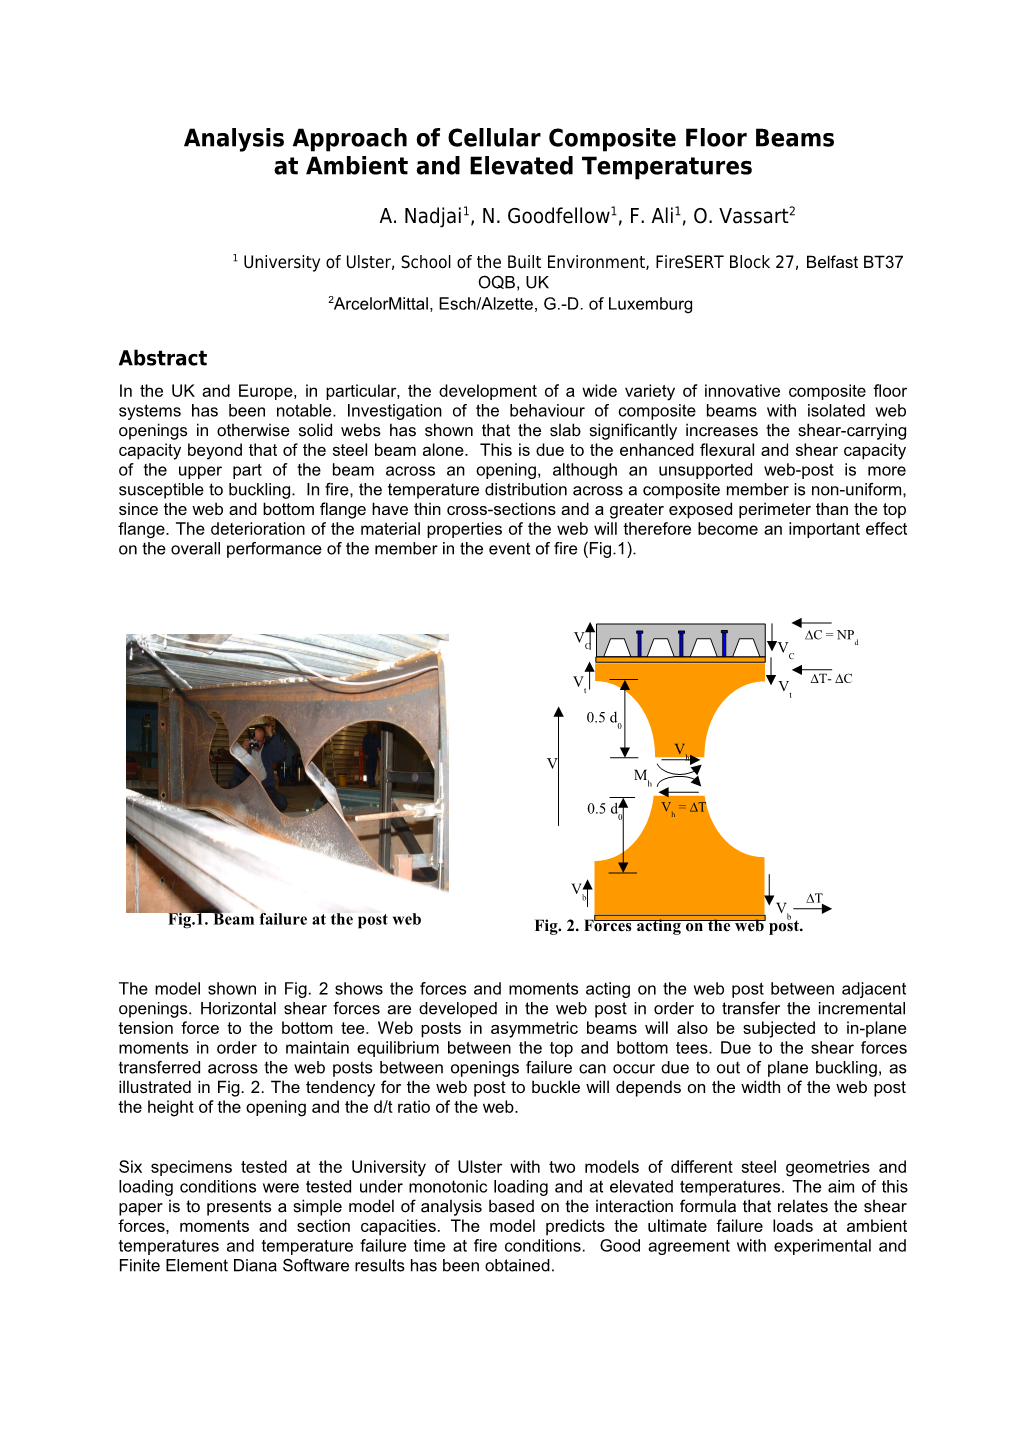 Performance of Cellular Composite Floor Beams at Elevated Temperatures